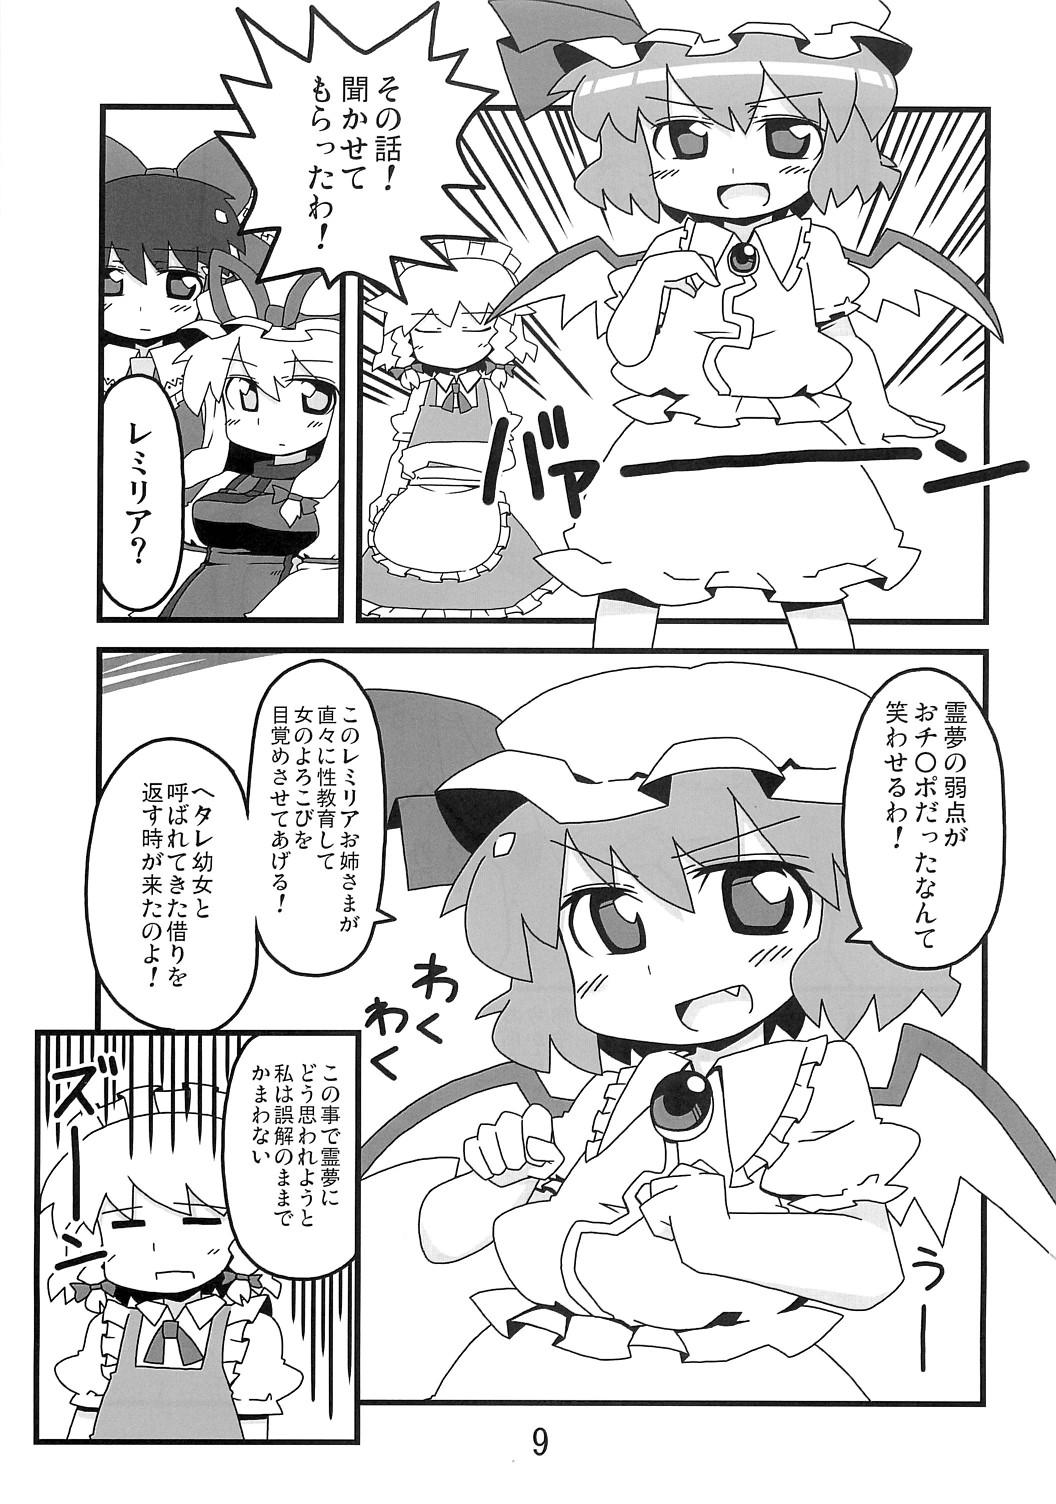 Game 東方豊年祭 - Touhou project Naija - Page 8